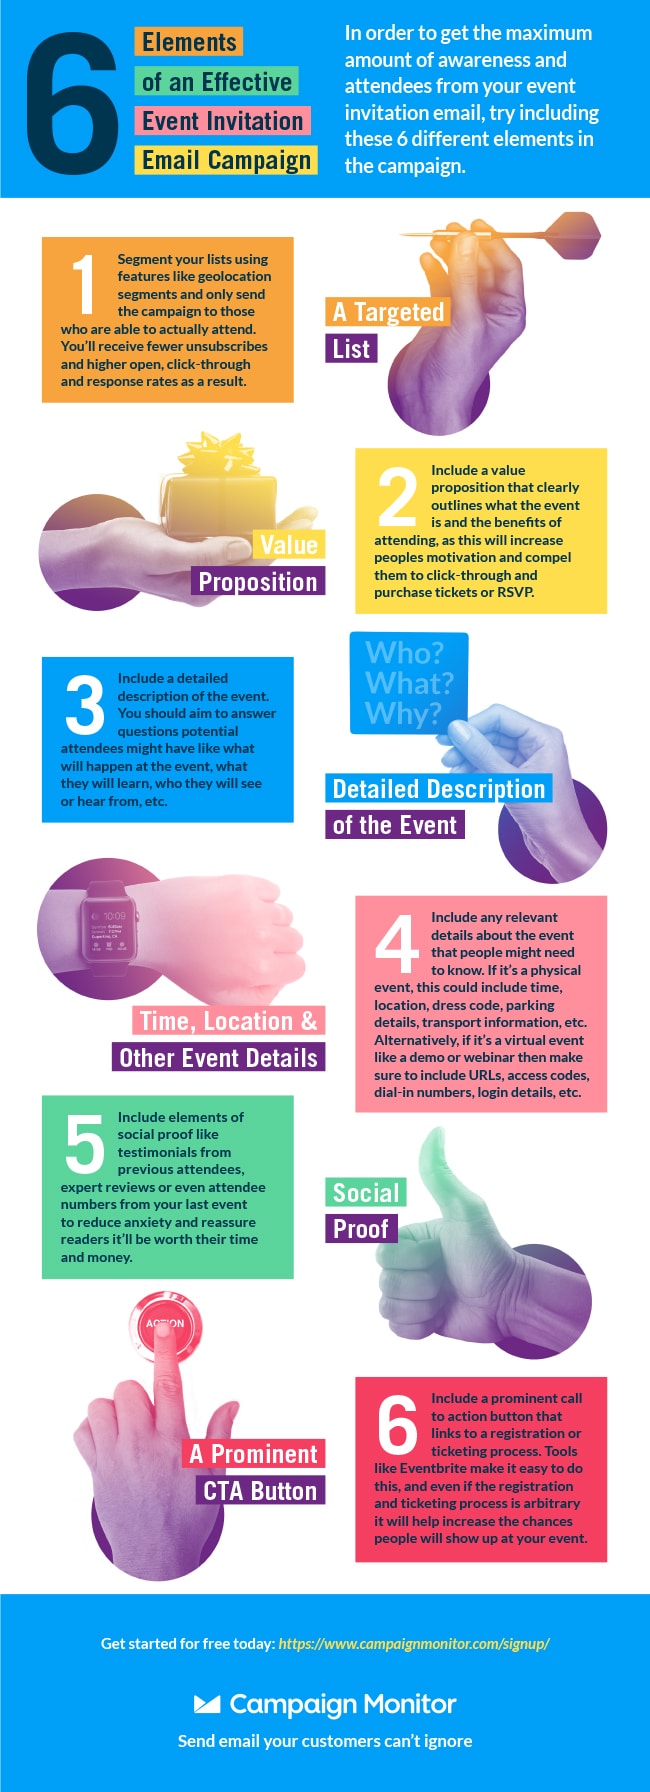 Event invitation Email Campaign Infographic 